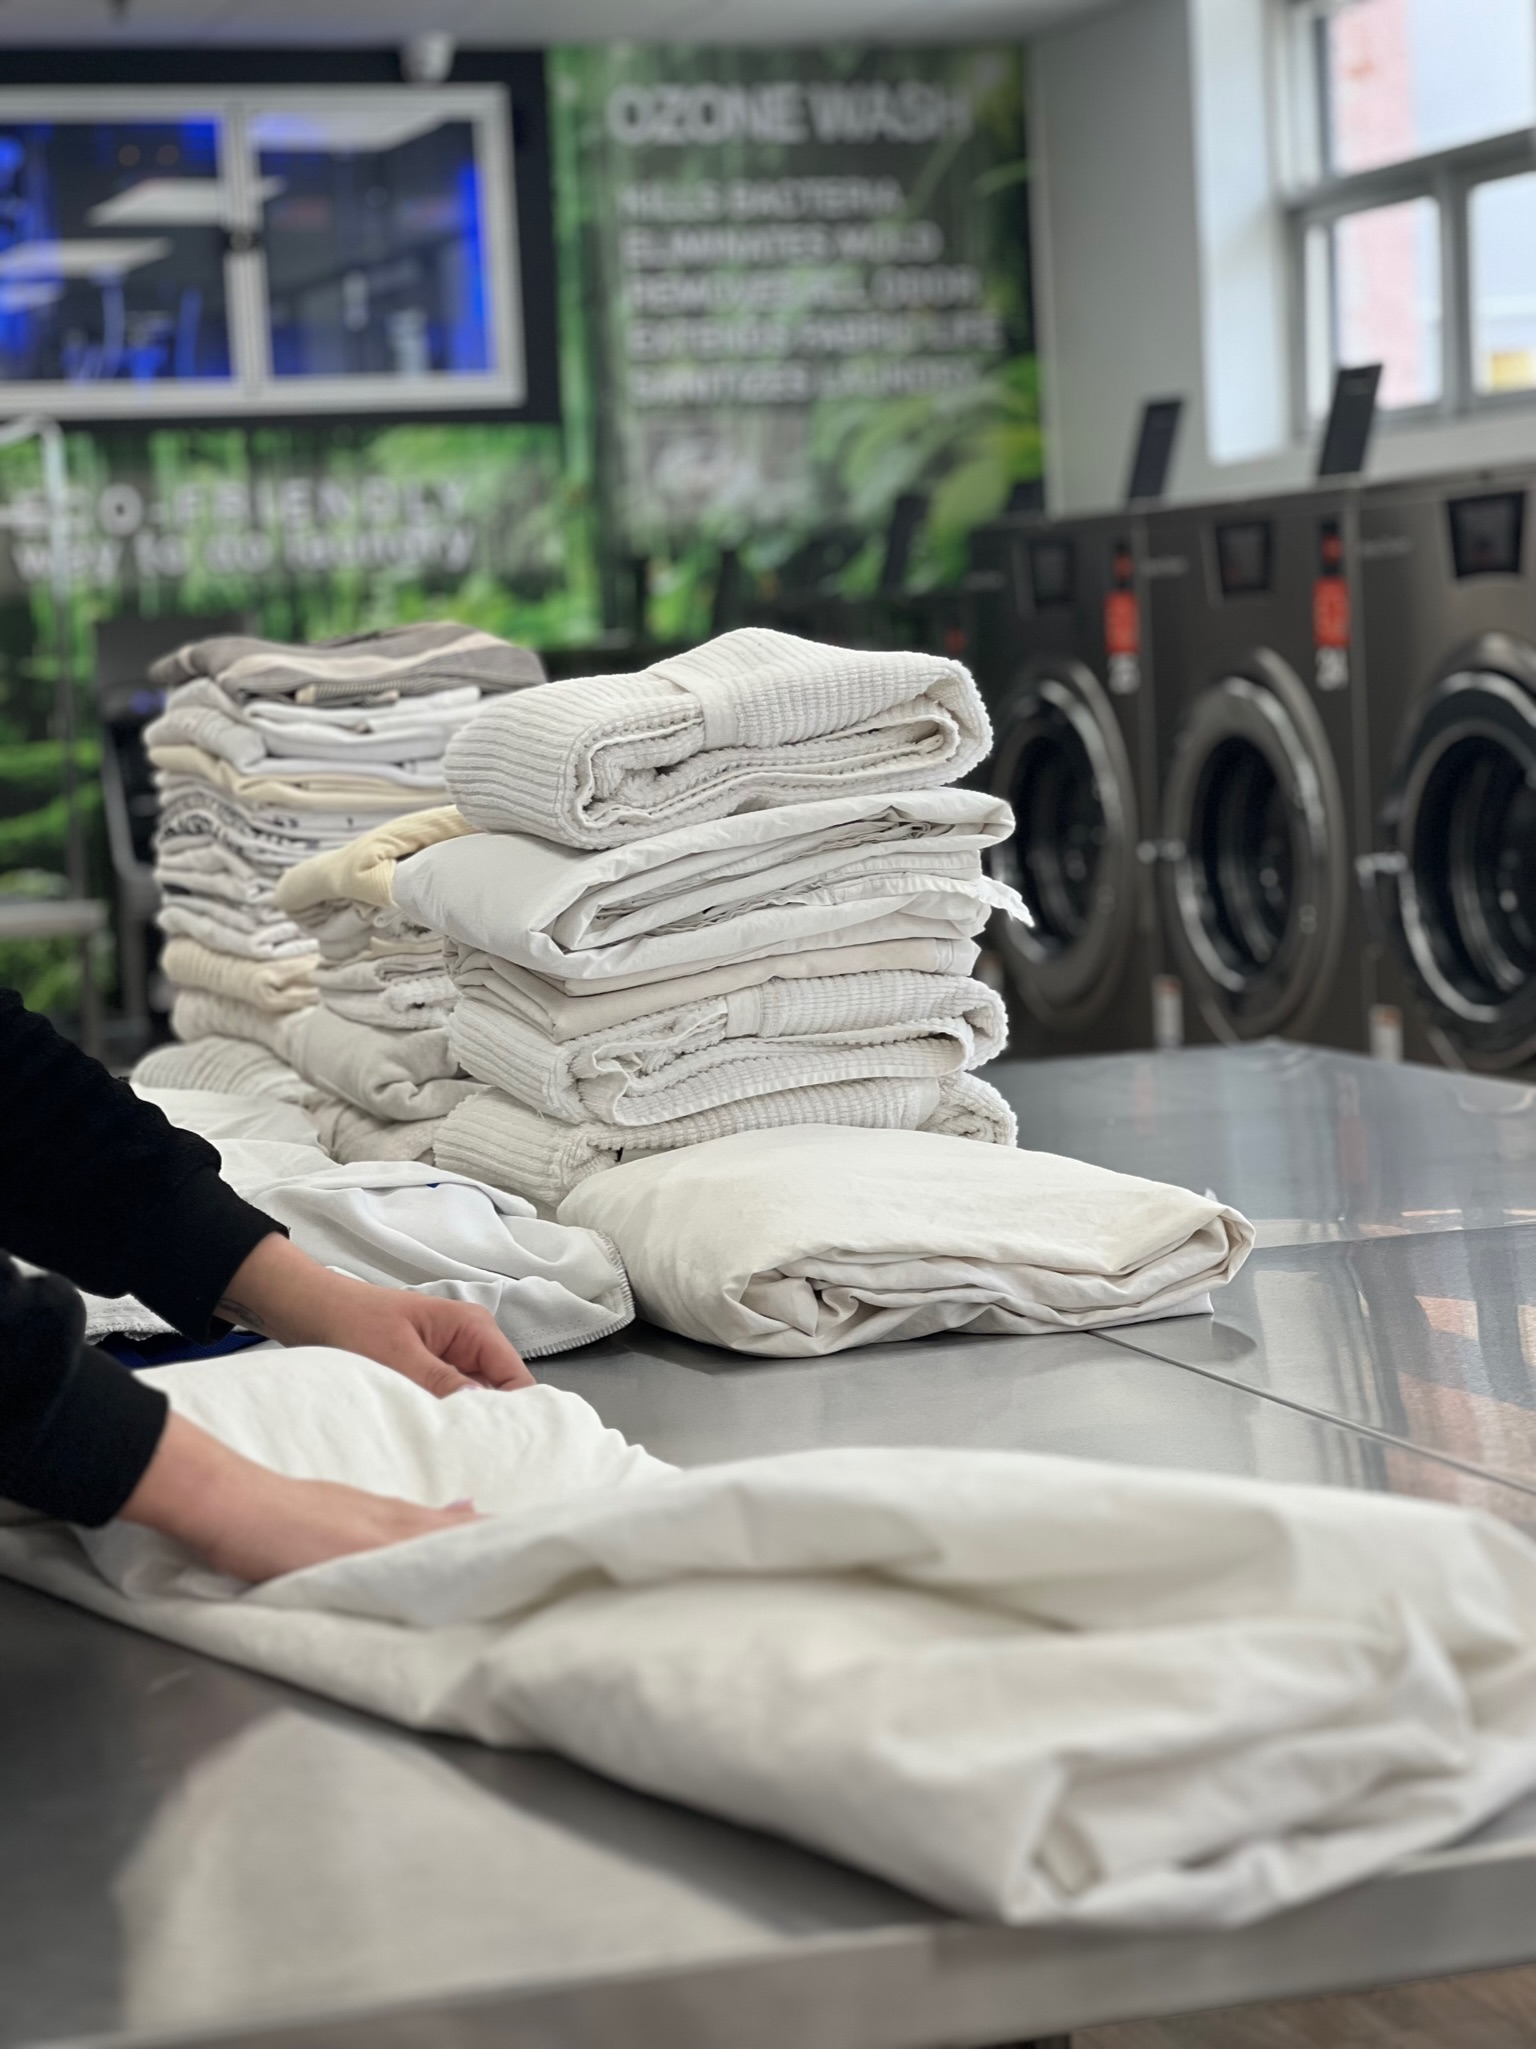 Forget about dirty laundry, and use our wash fold laundry service